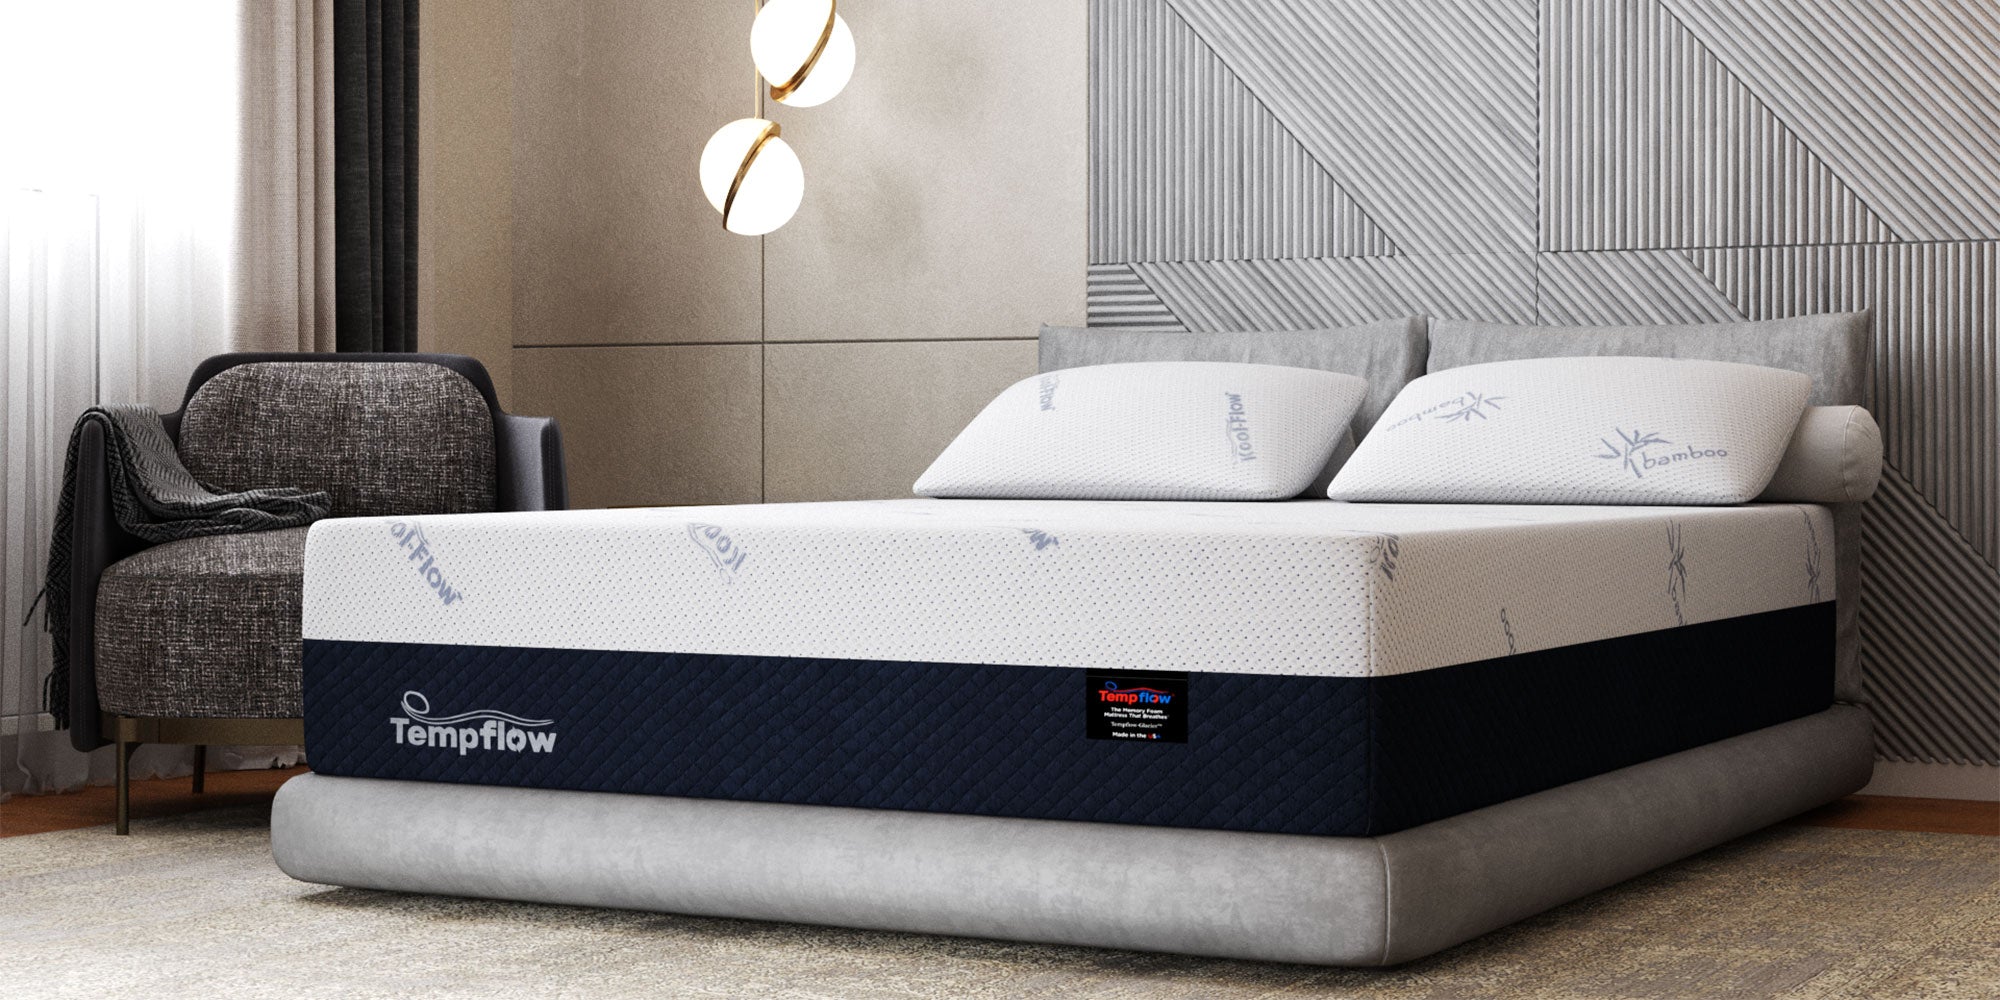 Hybrid Memory Foam Mattress With Cooling by Tempflow